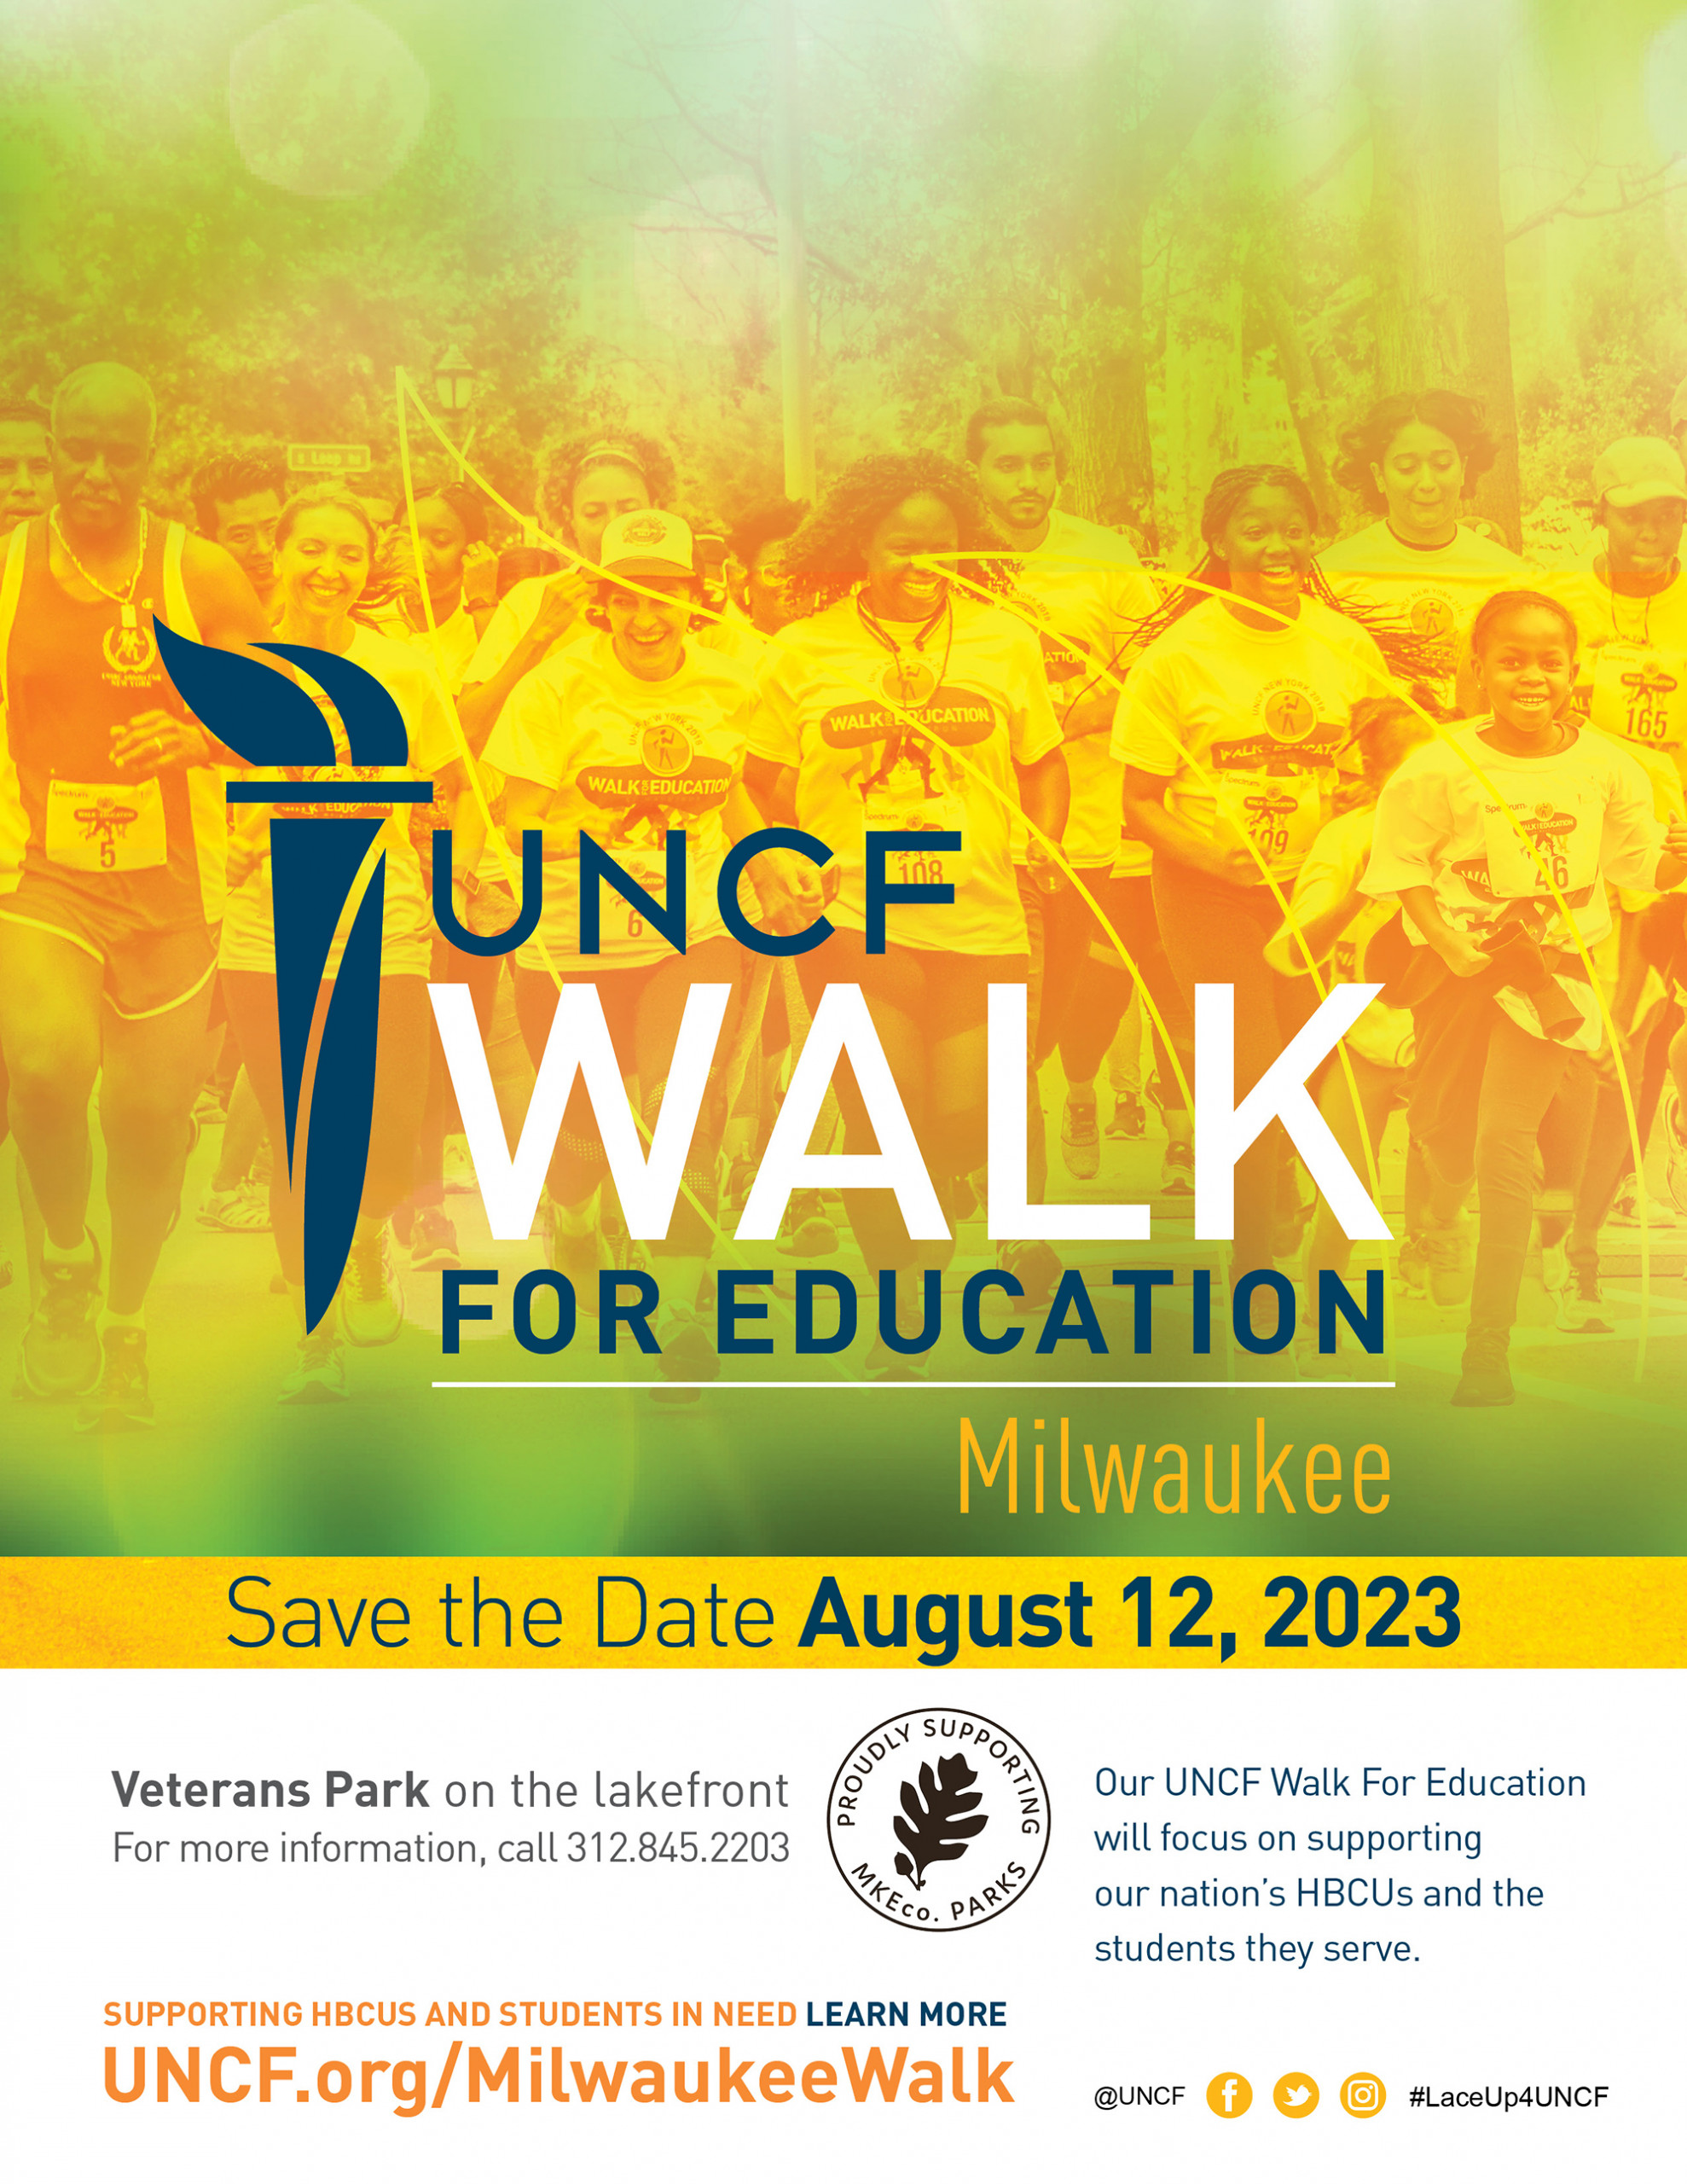 Milwaukee walk for education Save-the-Date: August 12, 2023; stay tuned for more information